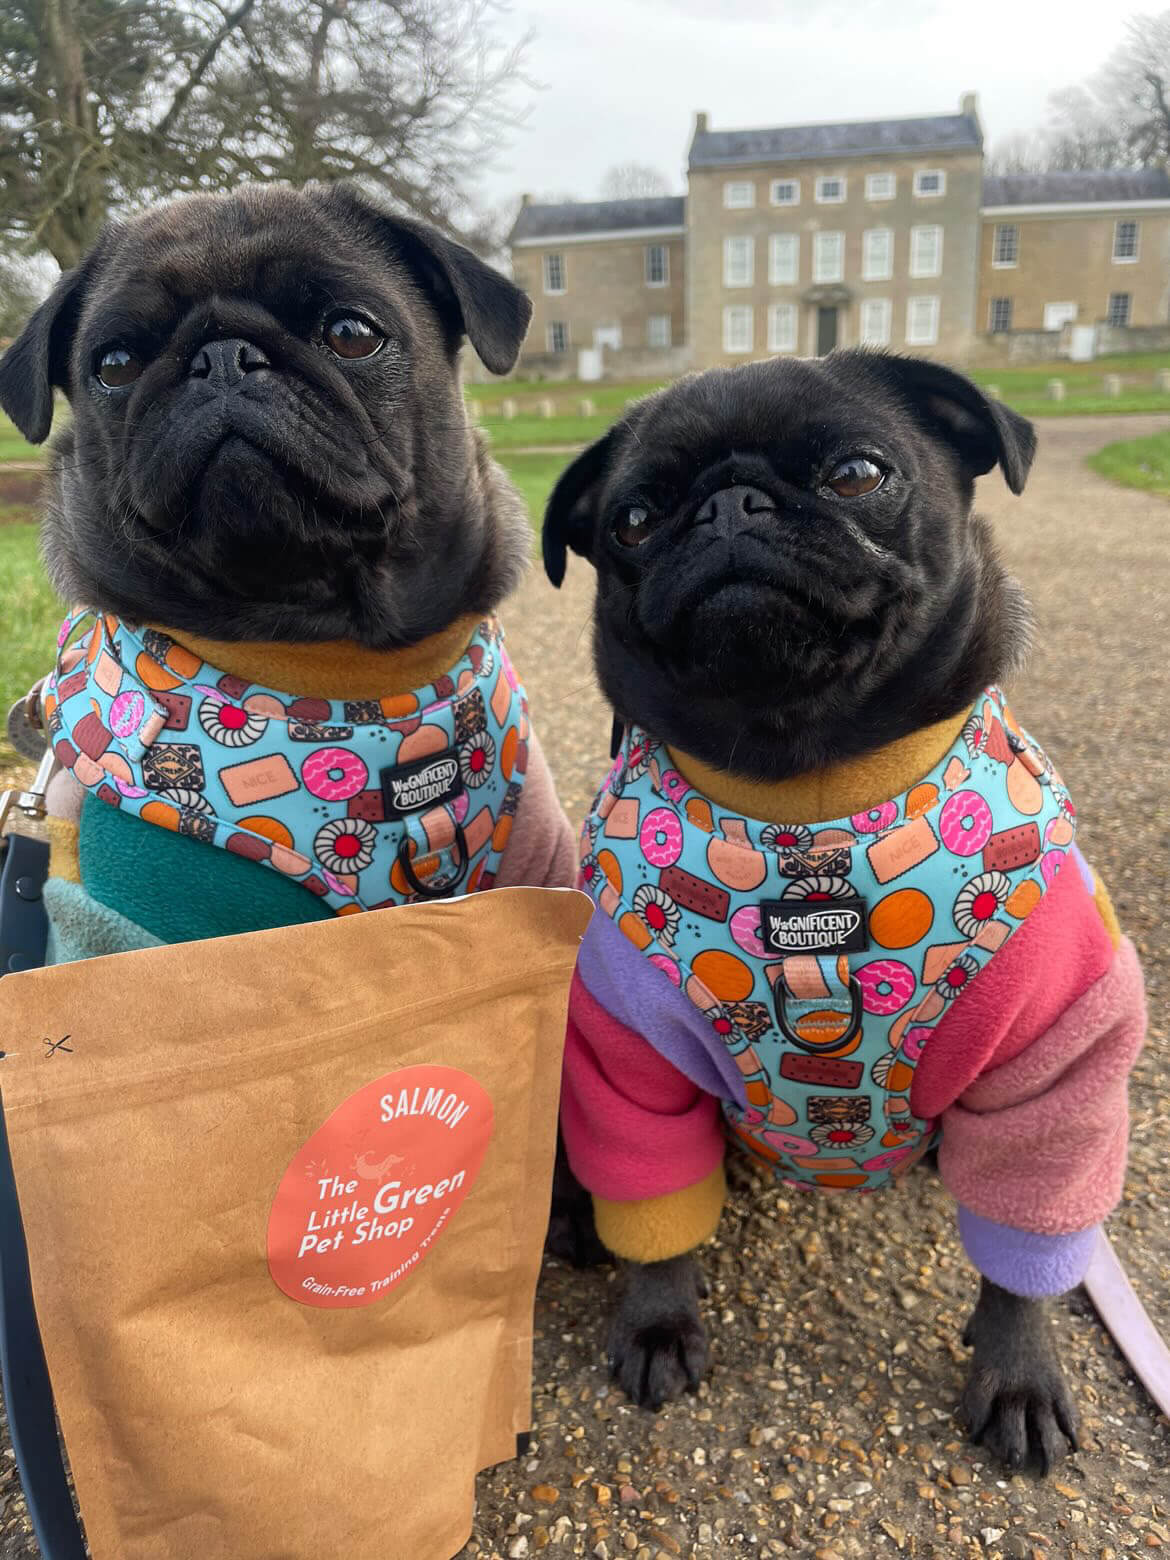 Two black pugs pose with a packet of treats from The Little Green Pet Shop.